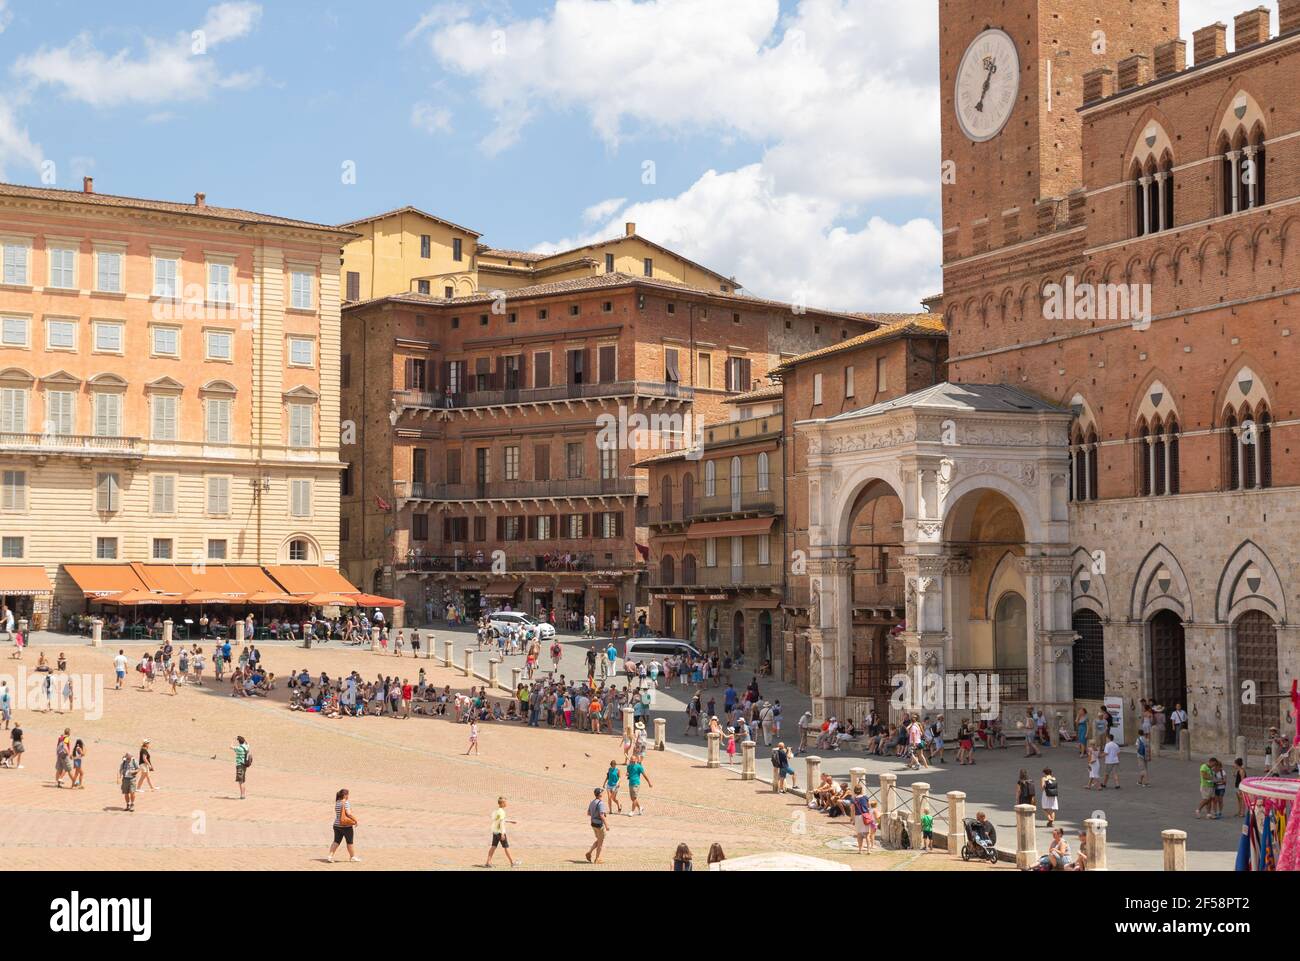 Plaza del Campo is the main public space of the historic center of Siena, Tuscany, Italy Stock Photo